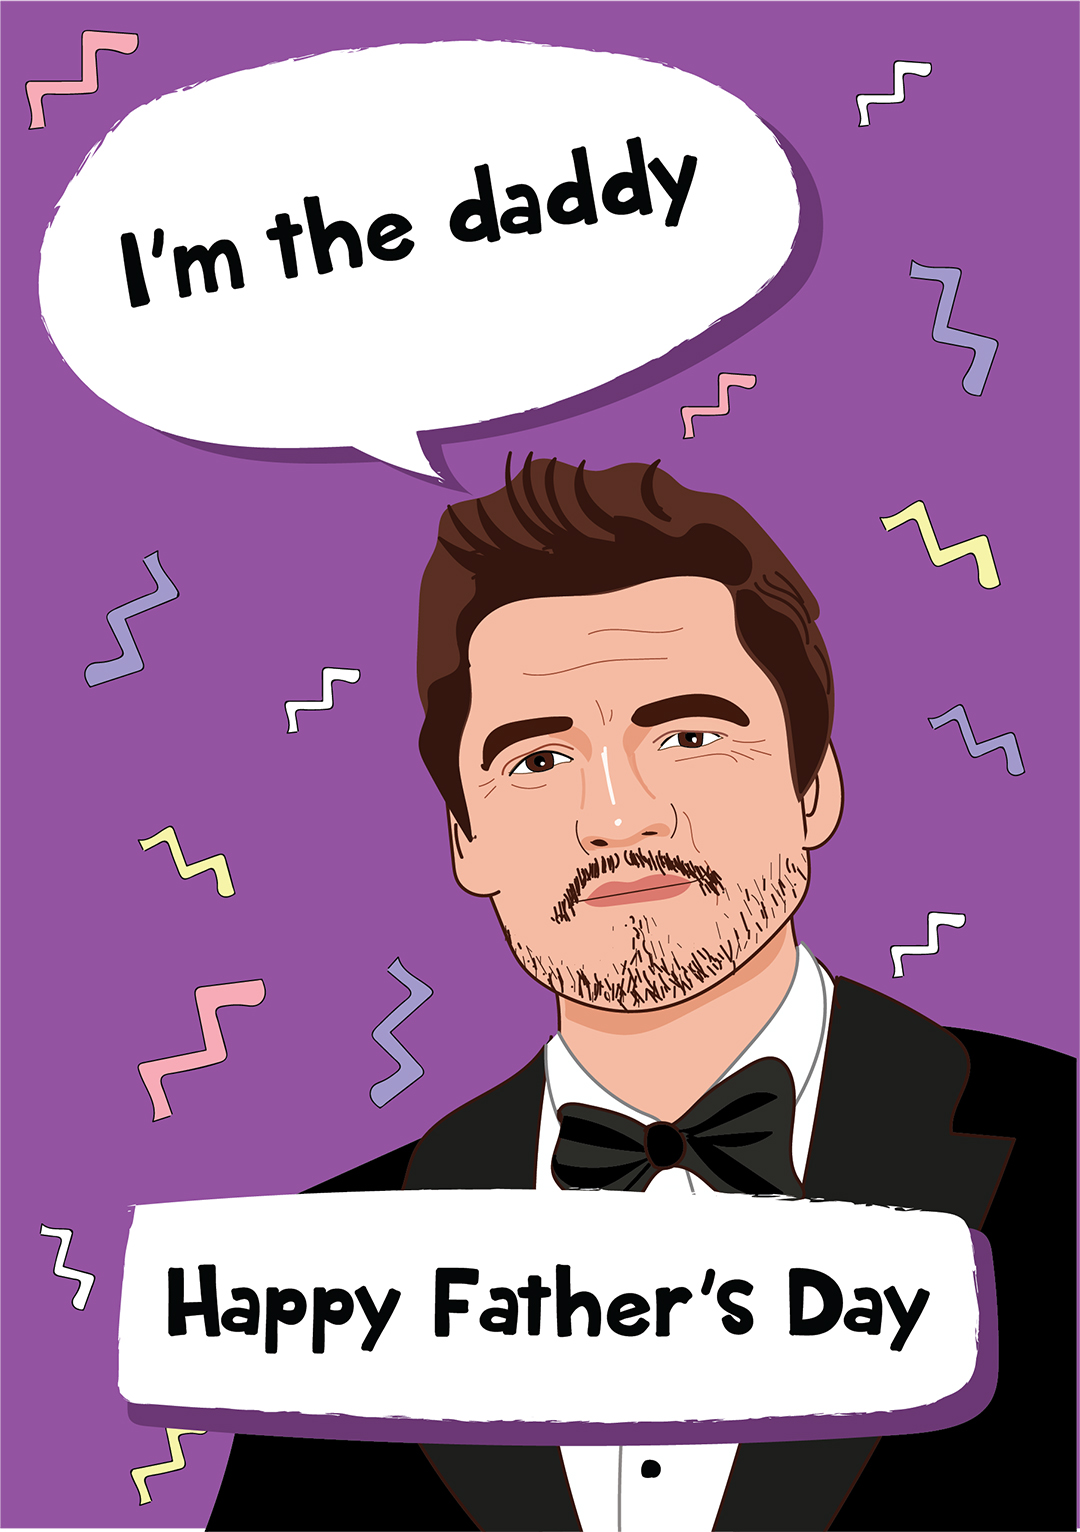 I'm The Daddy - Pedro Pascal Inspired Father's Day Card